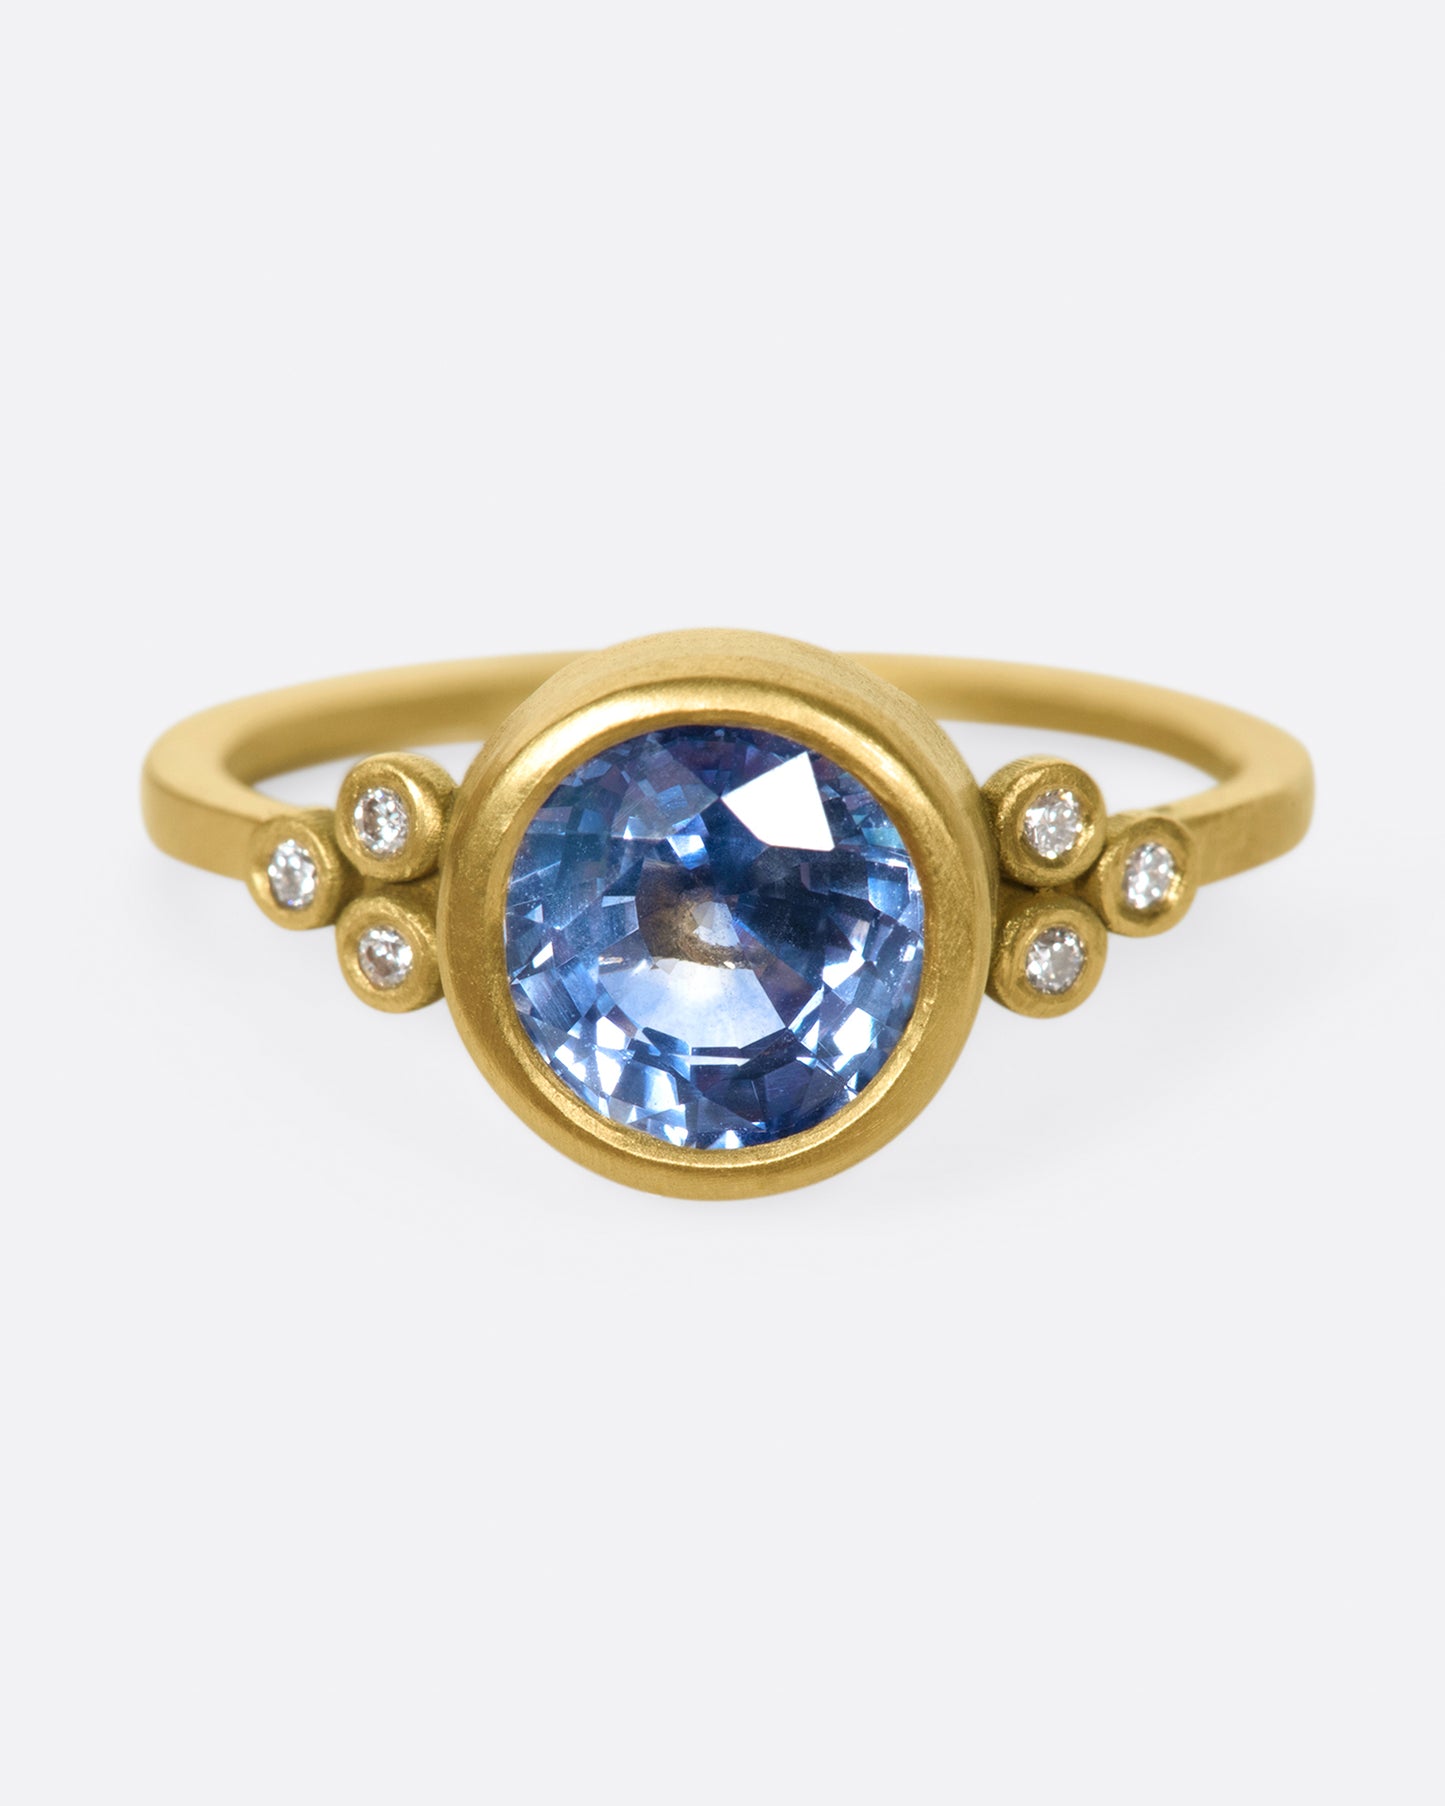 The stunning, periwinkle blue sapphire at the center of this ring is the star of the show.